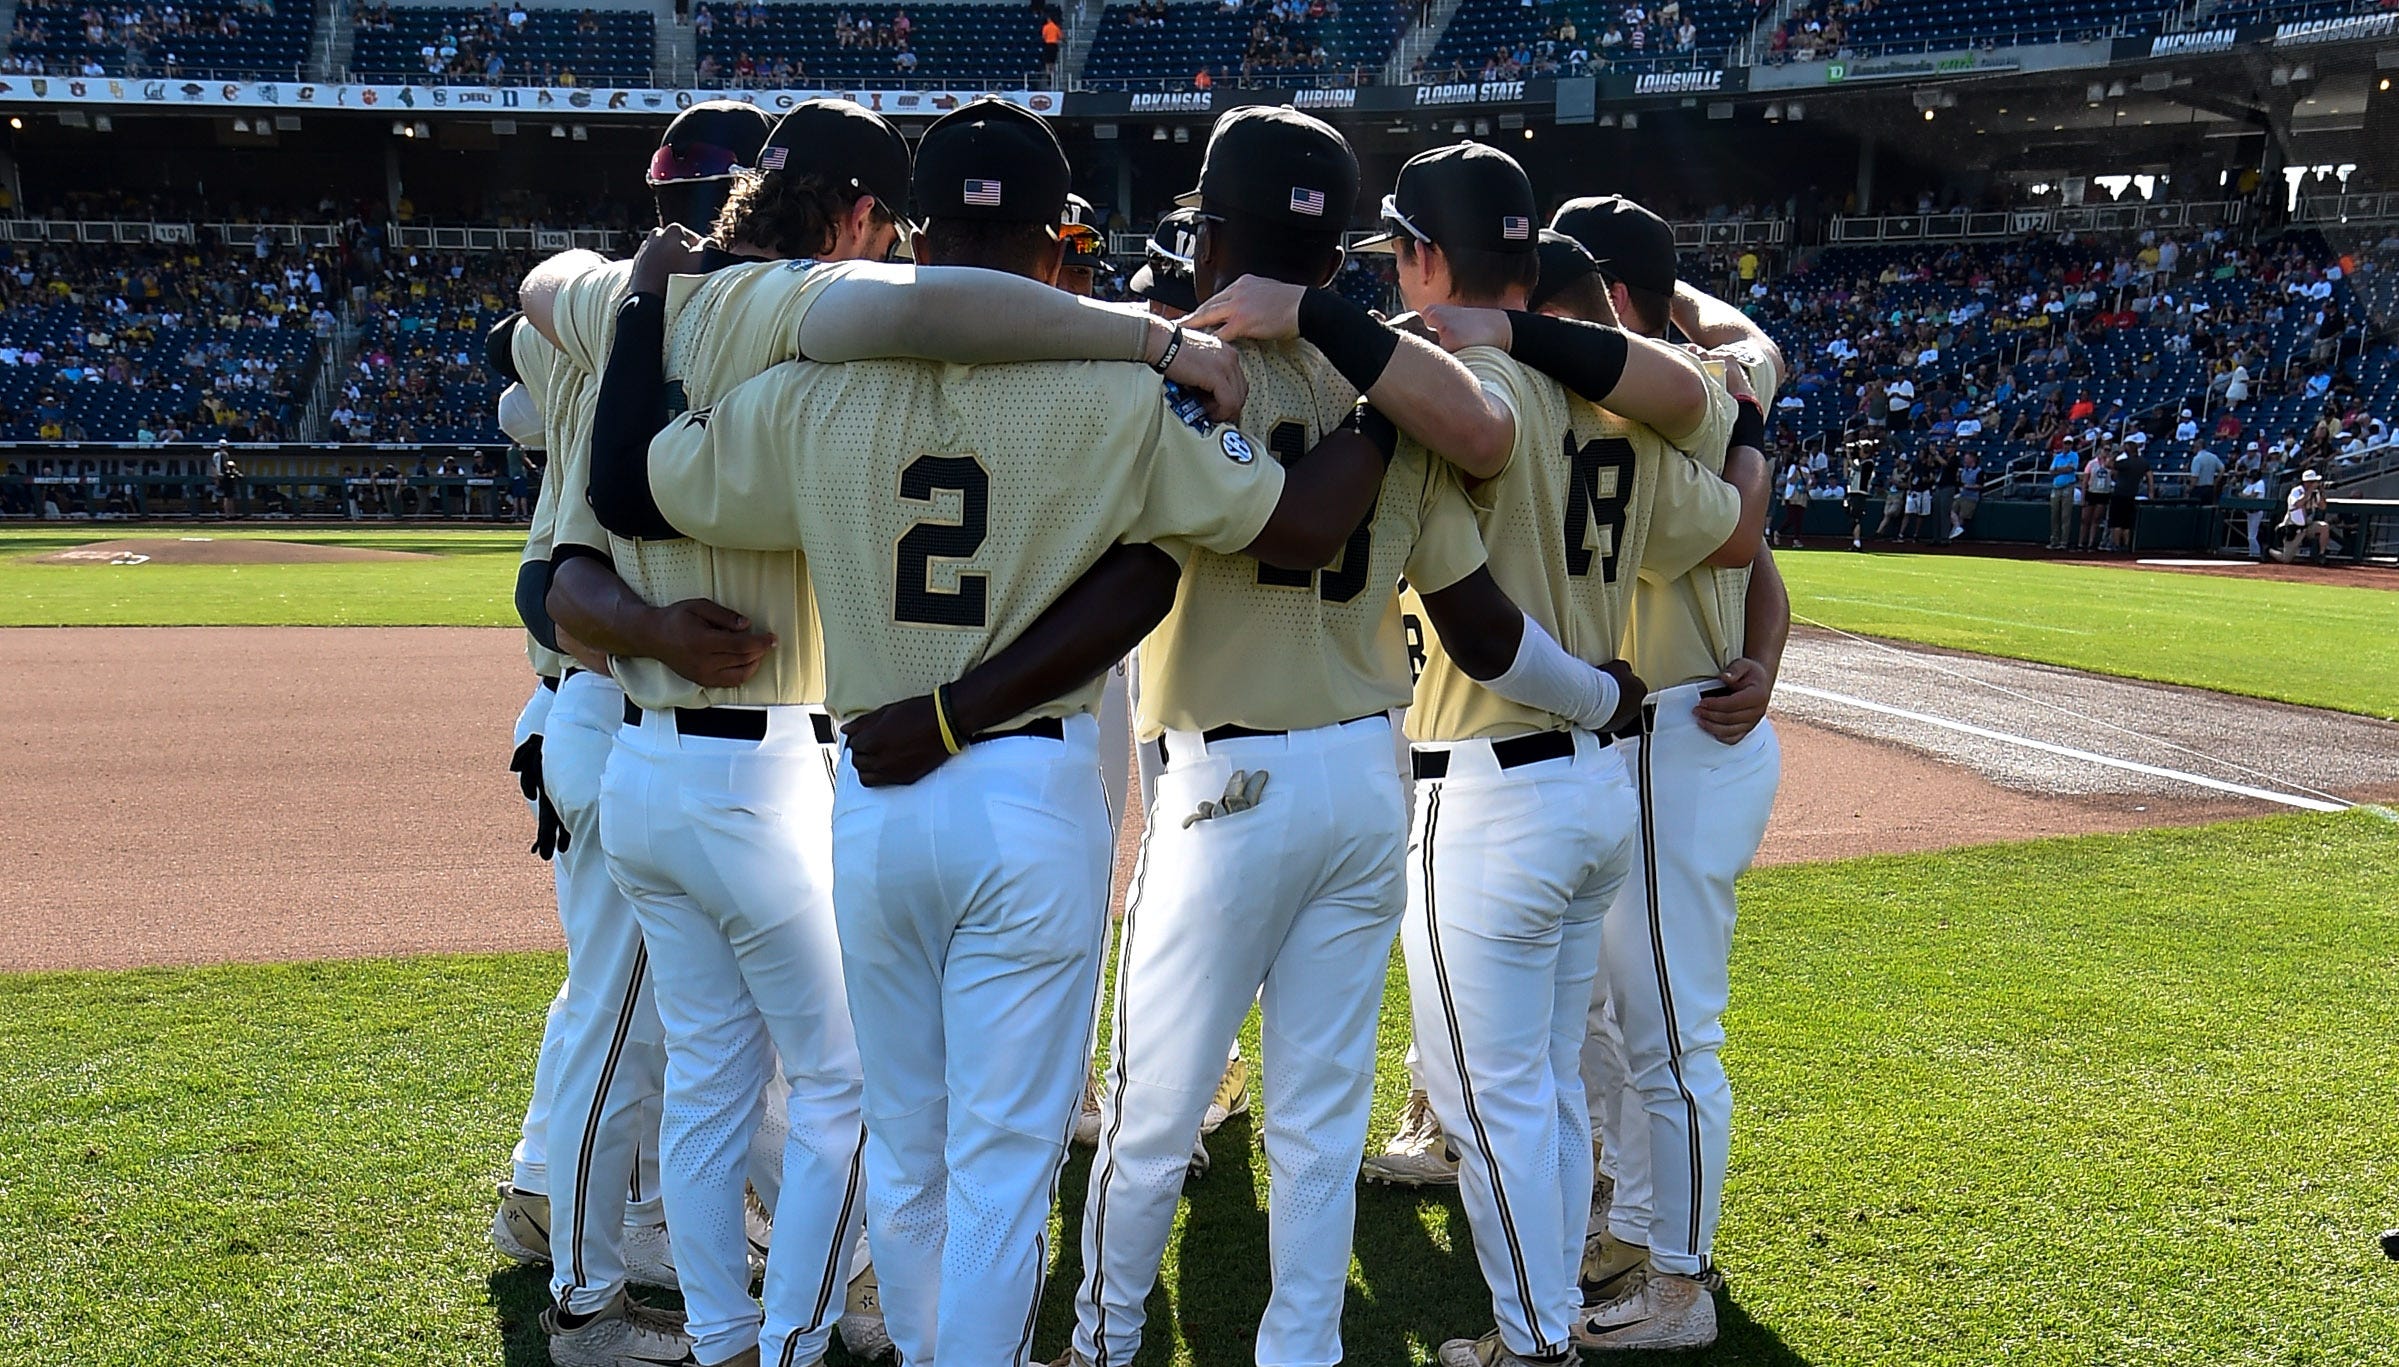 A special College World Series for Vanderbilt and Tennessee — if that other team wasn't there